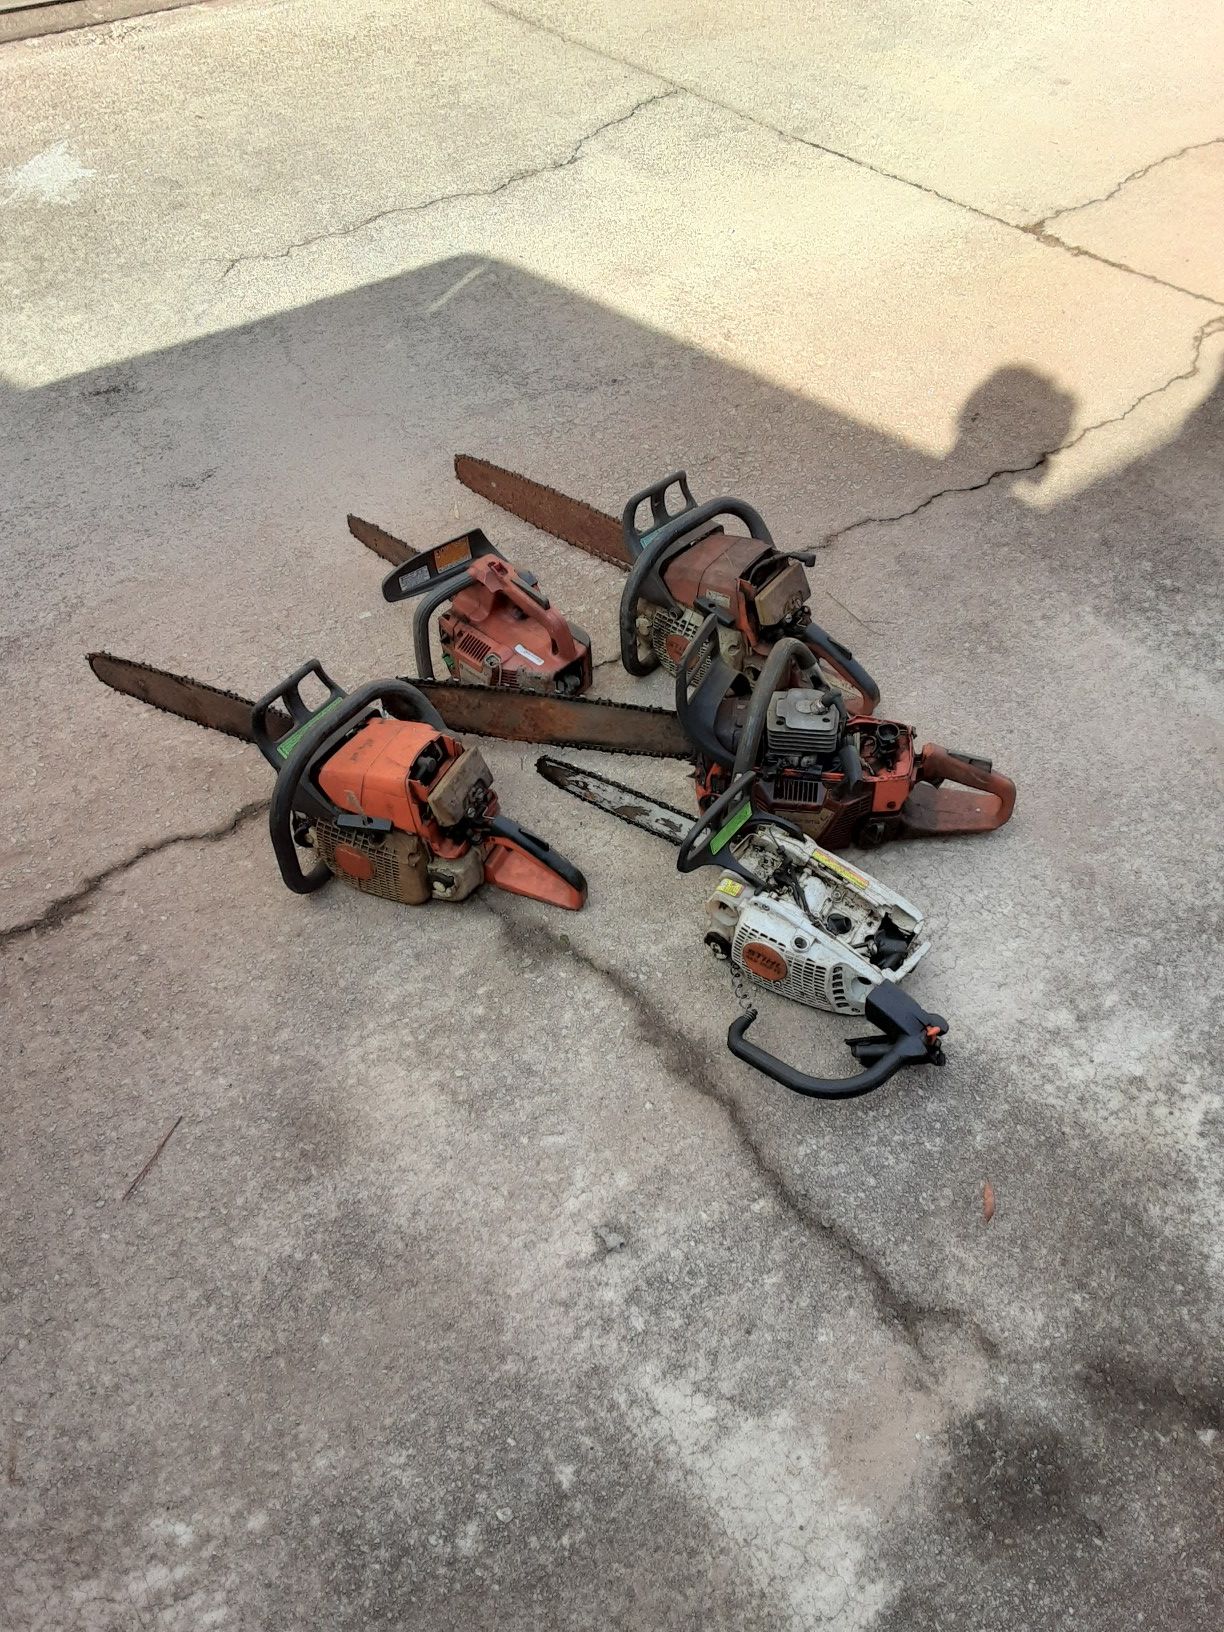 Chainsaw parts